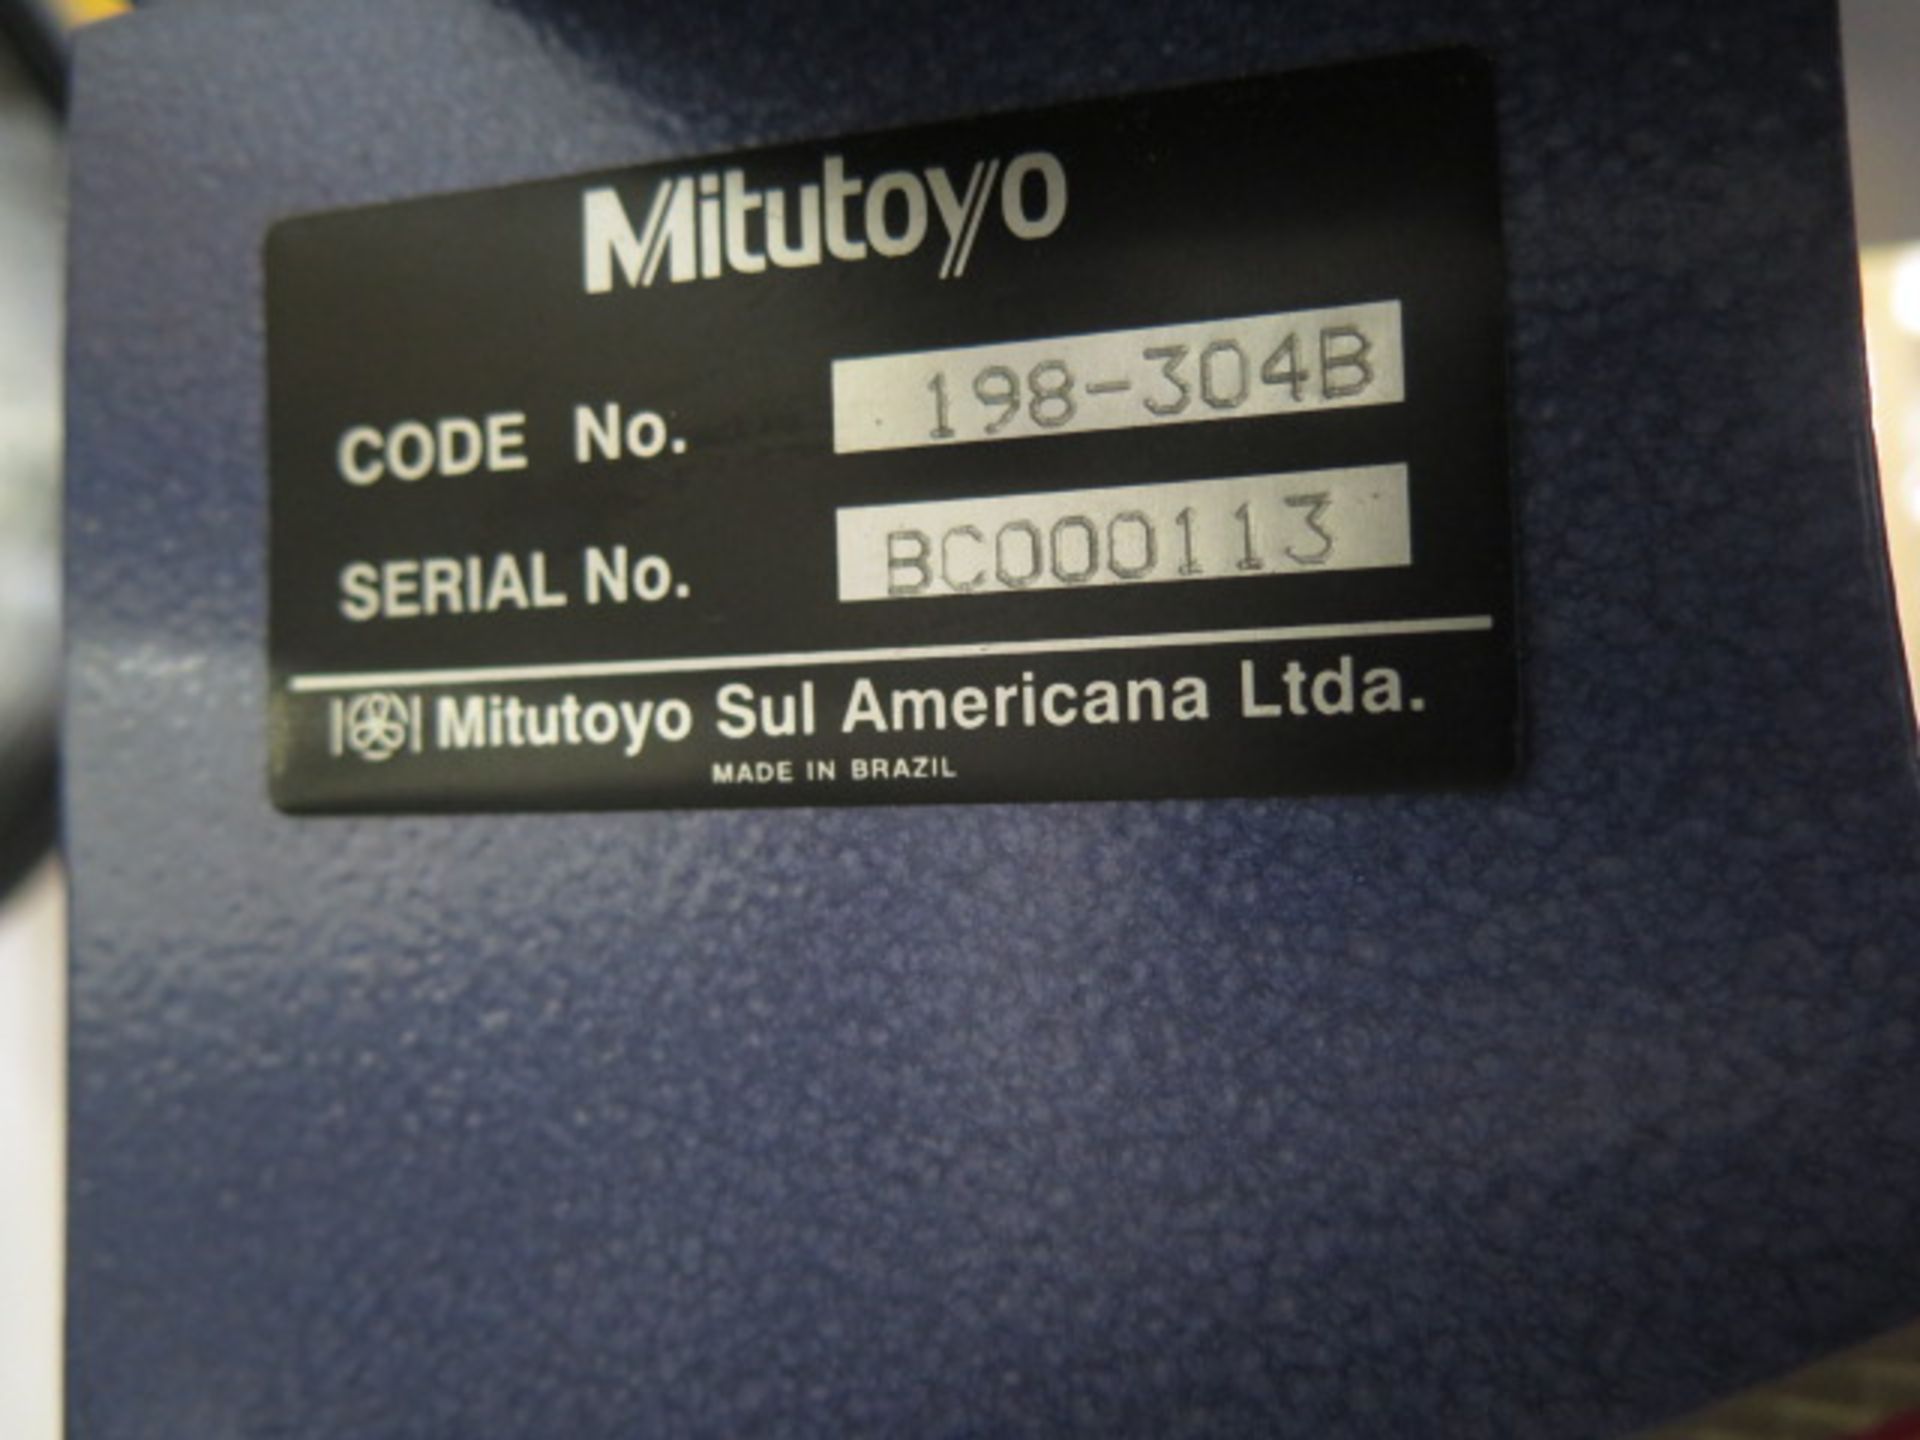 2010 Mitutoyo Measure 333 Manual CMM s/n BC000113 w/ Mitutoyo Programmable DRO, Renishaw, SOLD AS IS - Image 10 of 11